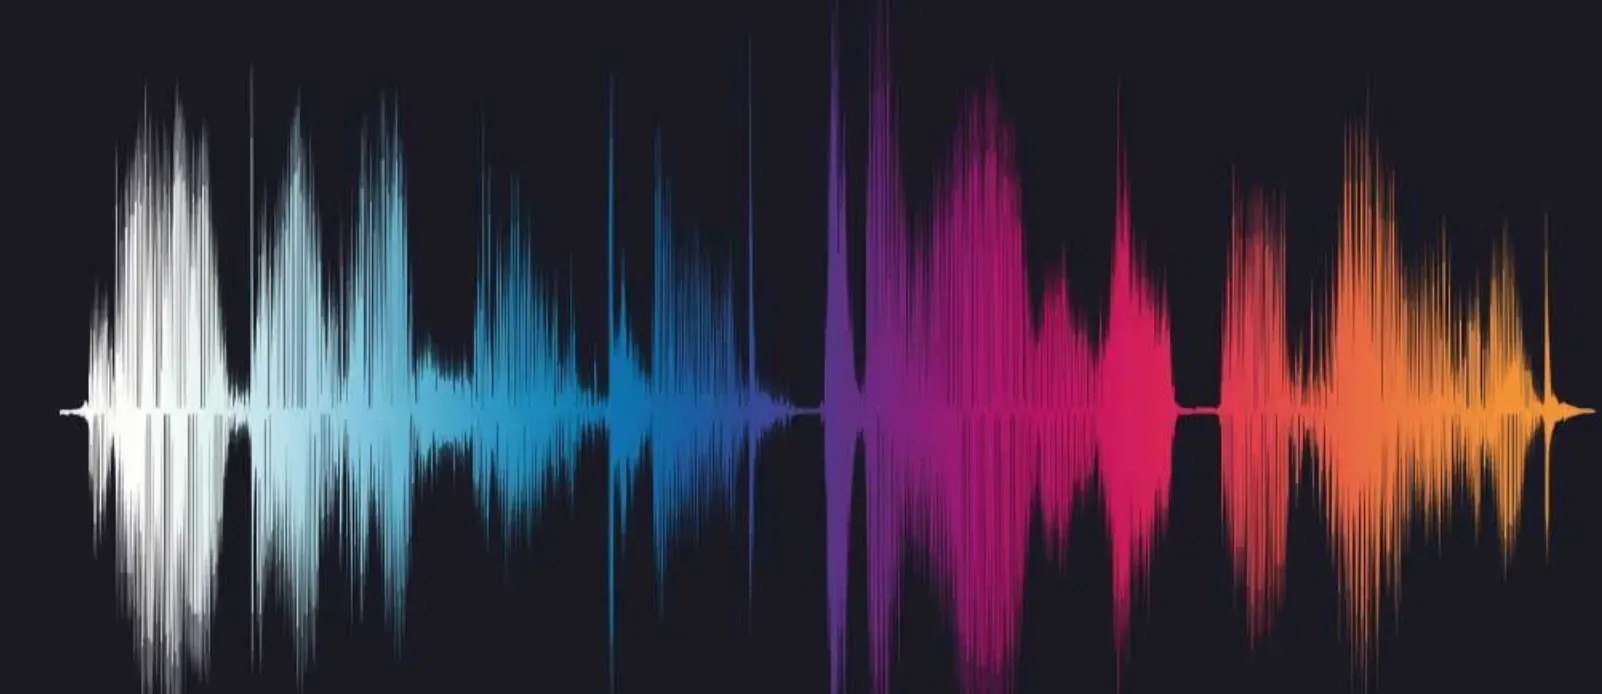 Voice Synthesis Industry: Ebert test